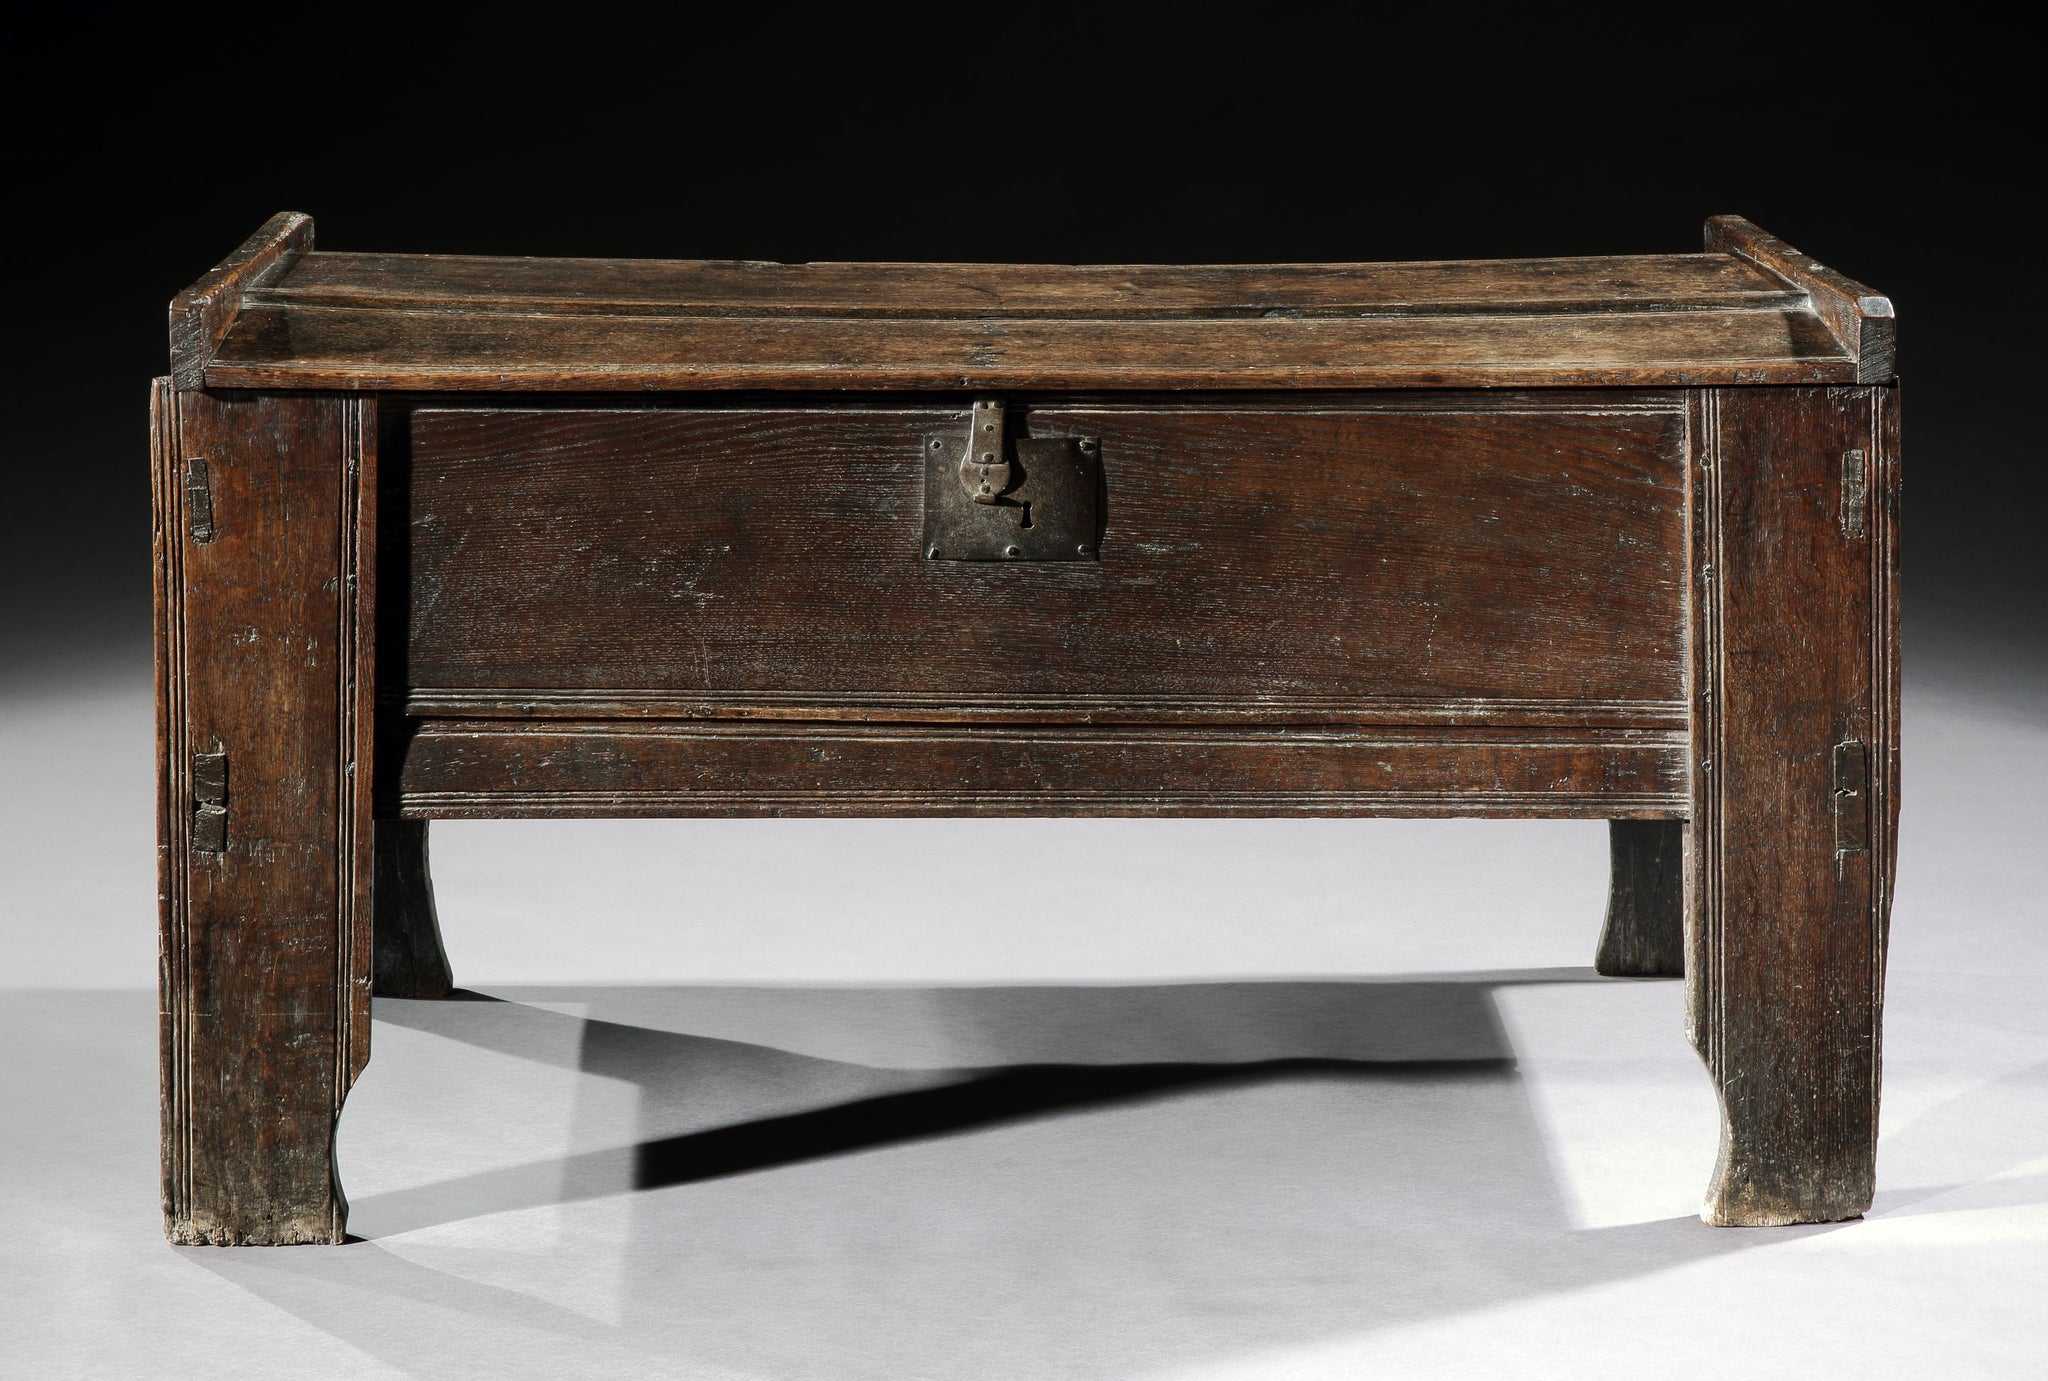 Rare Tall Sixteenth Century Boarded Chest